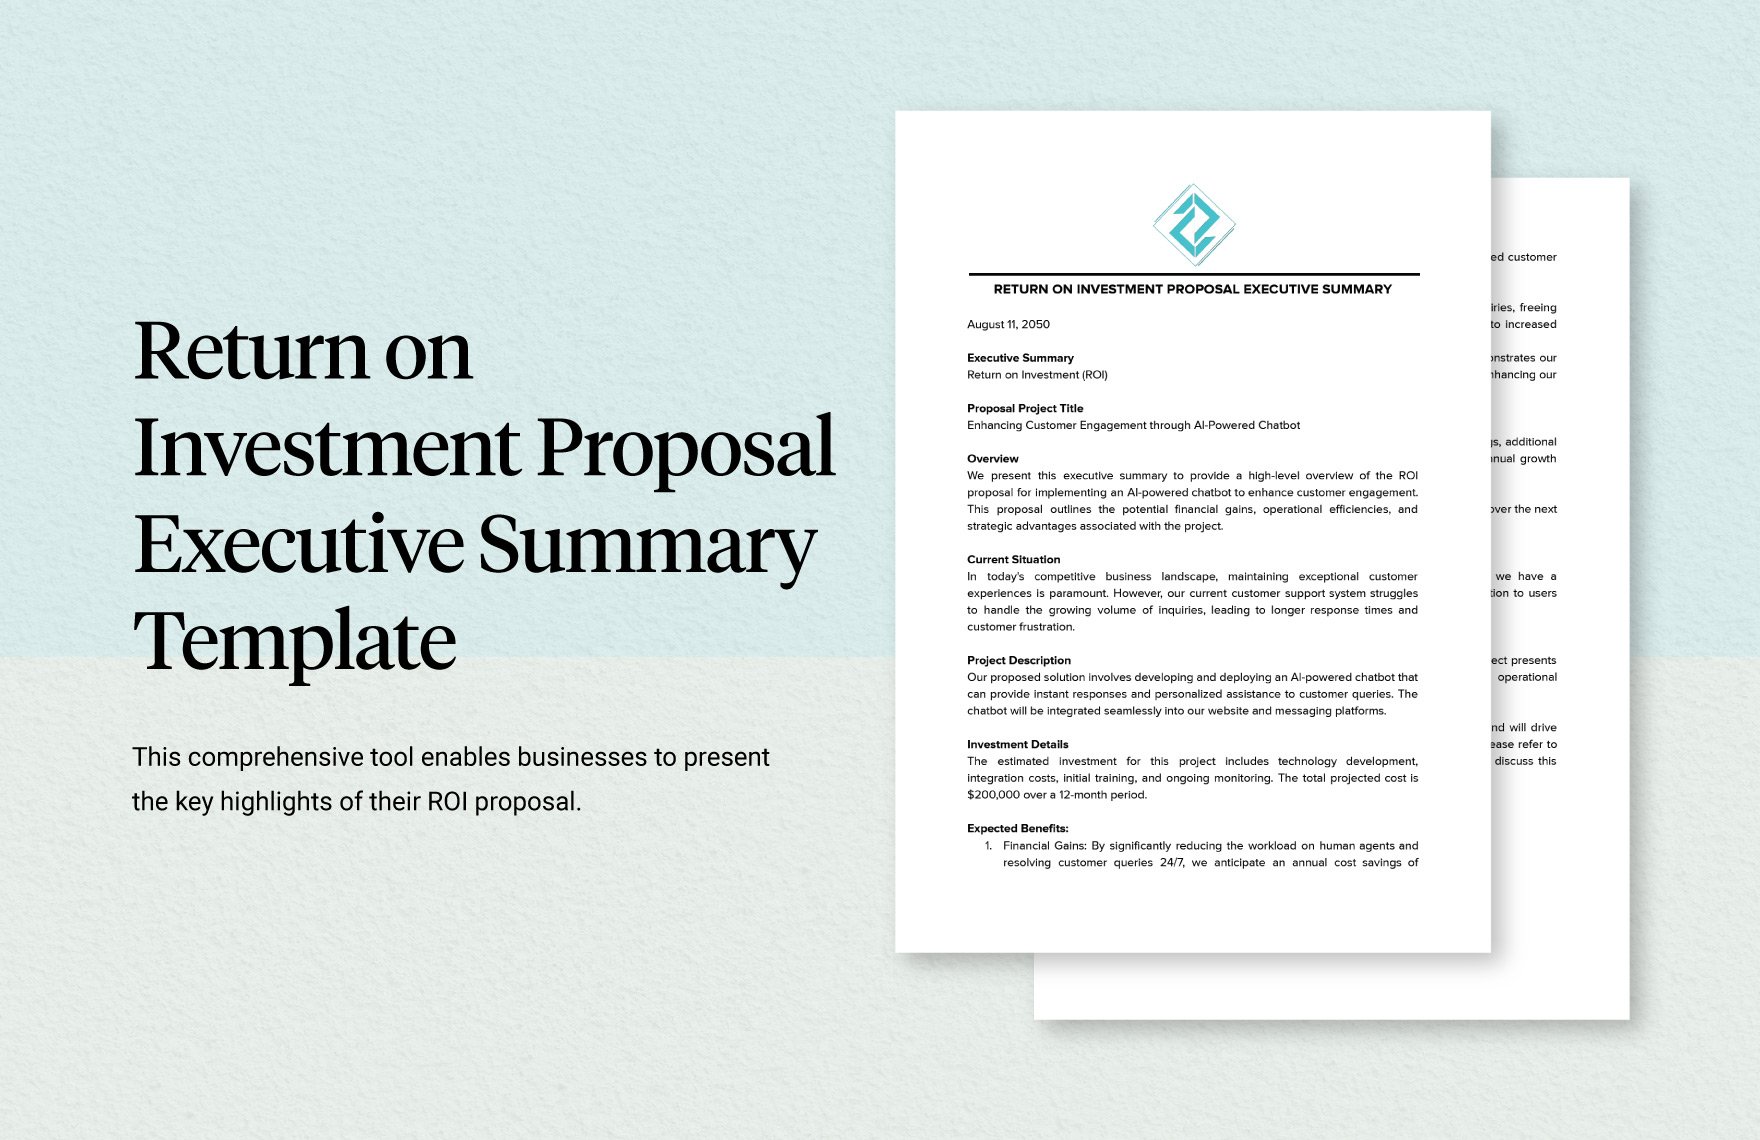 Return on Investment Proposal Executive Summary Template